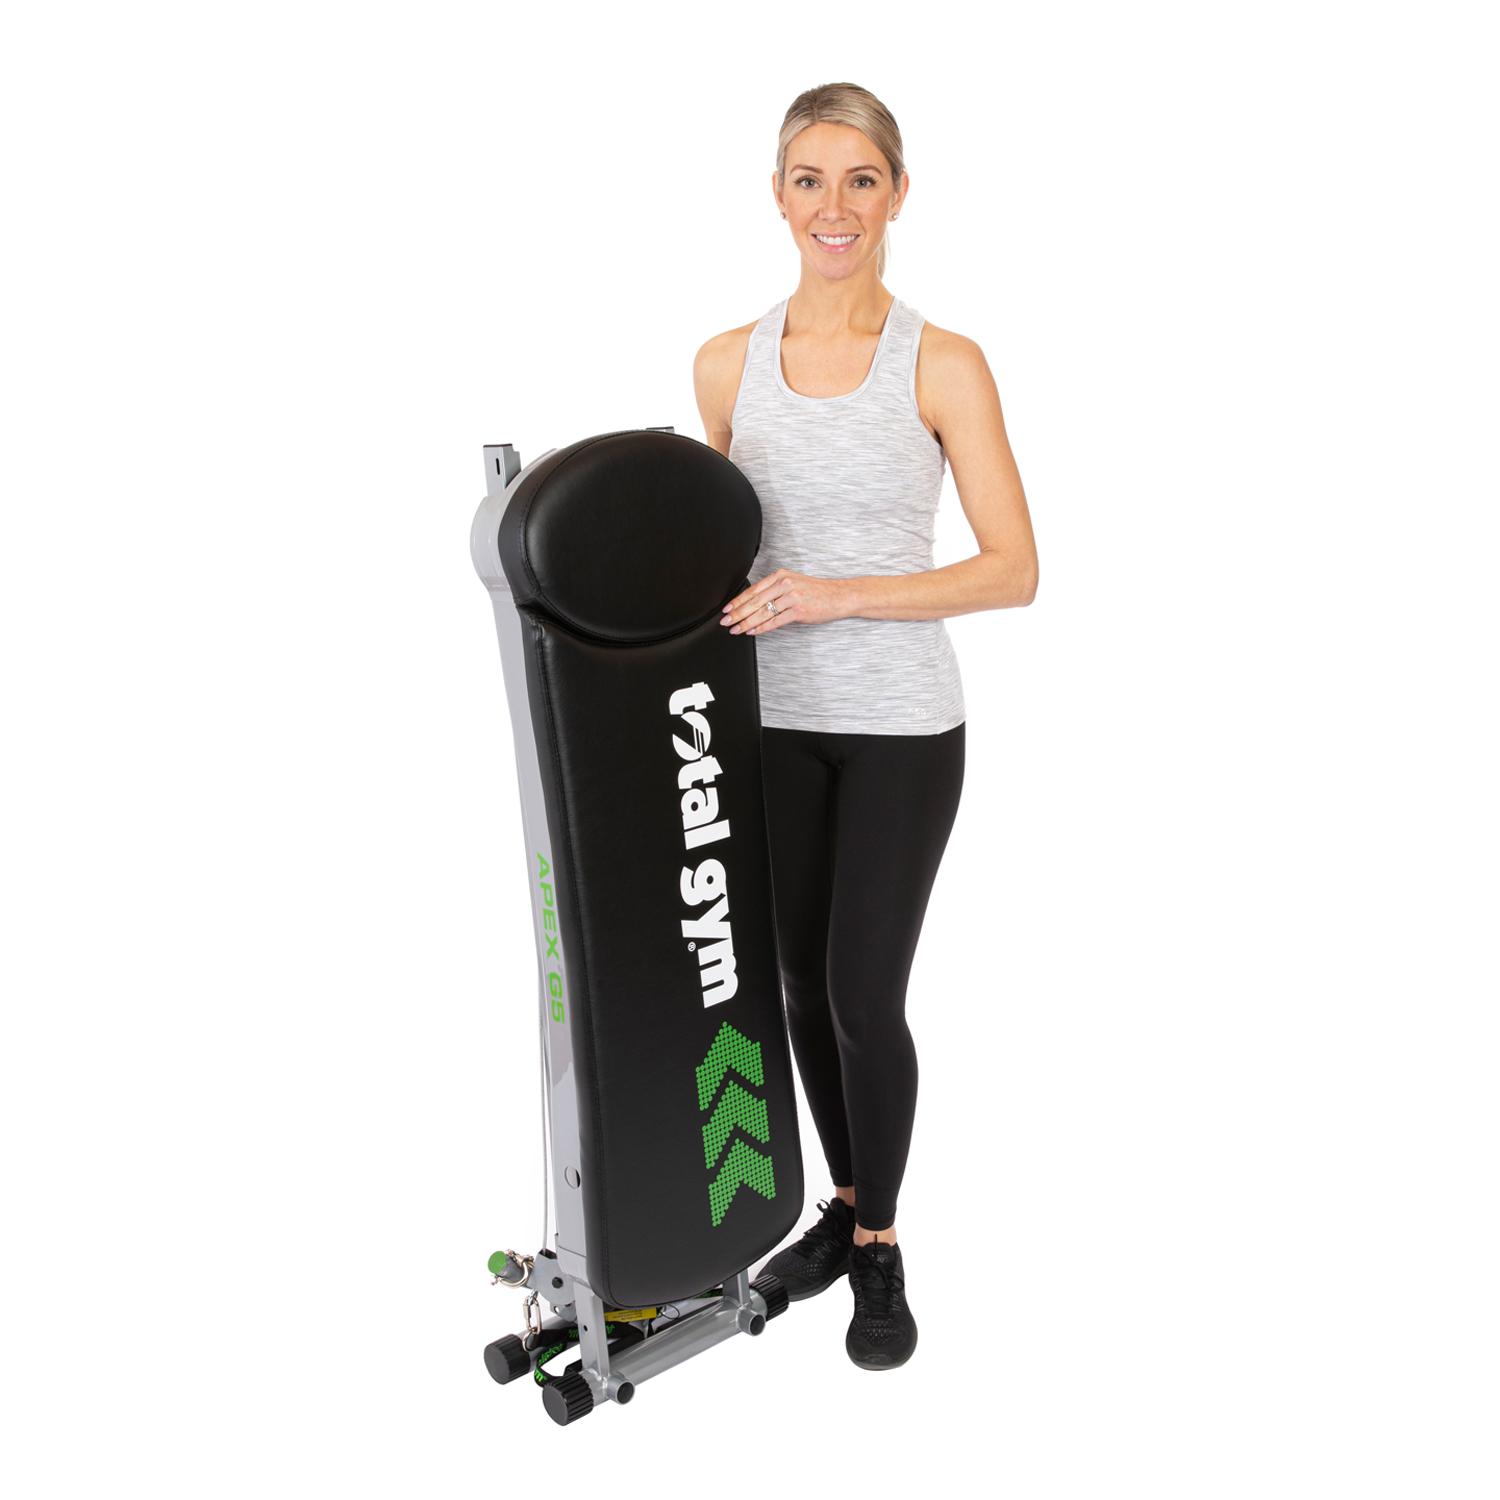 Total Gym APEX G5 Home Fitness Incline Weight Training with 10 Resistance Levels - image 2 of 11